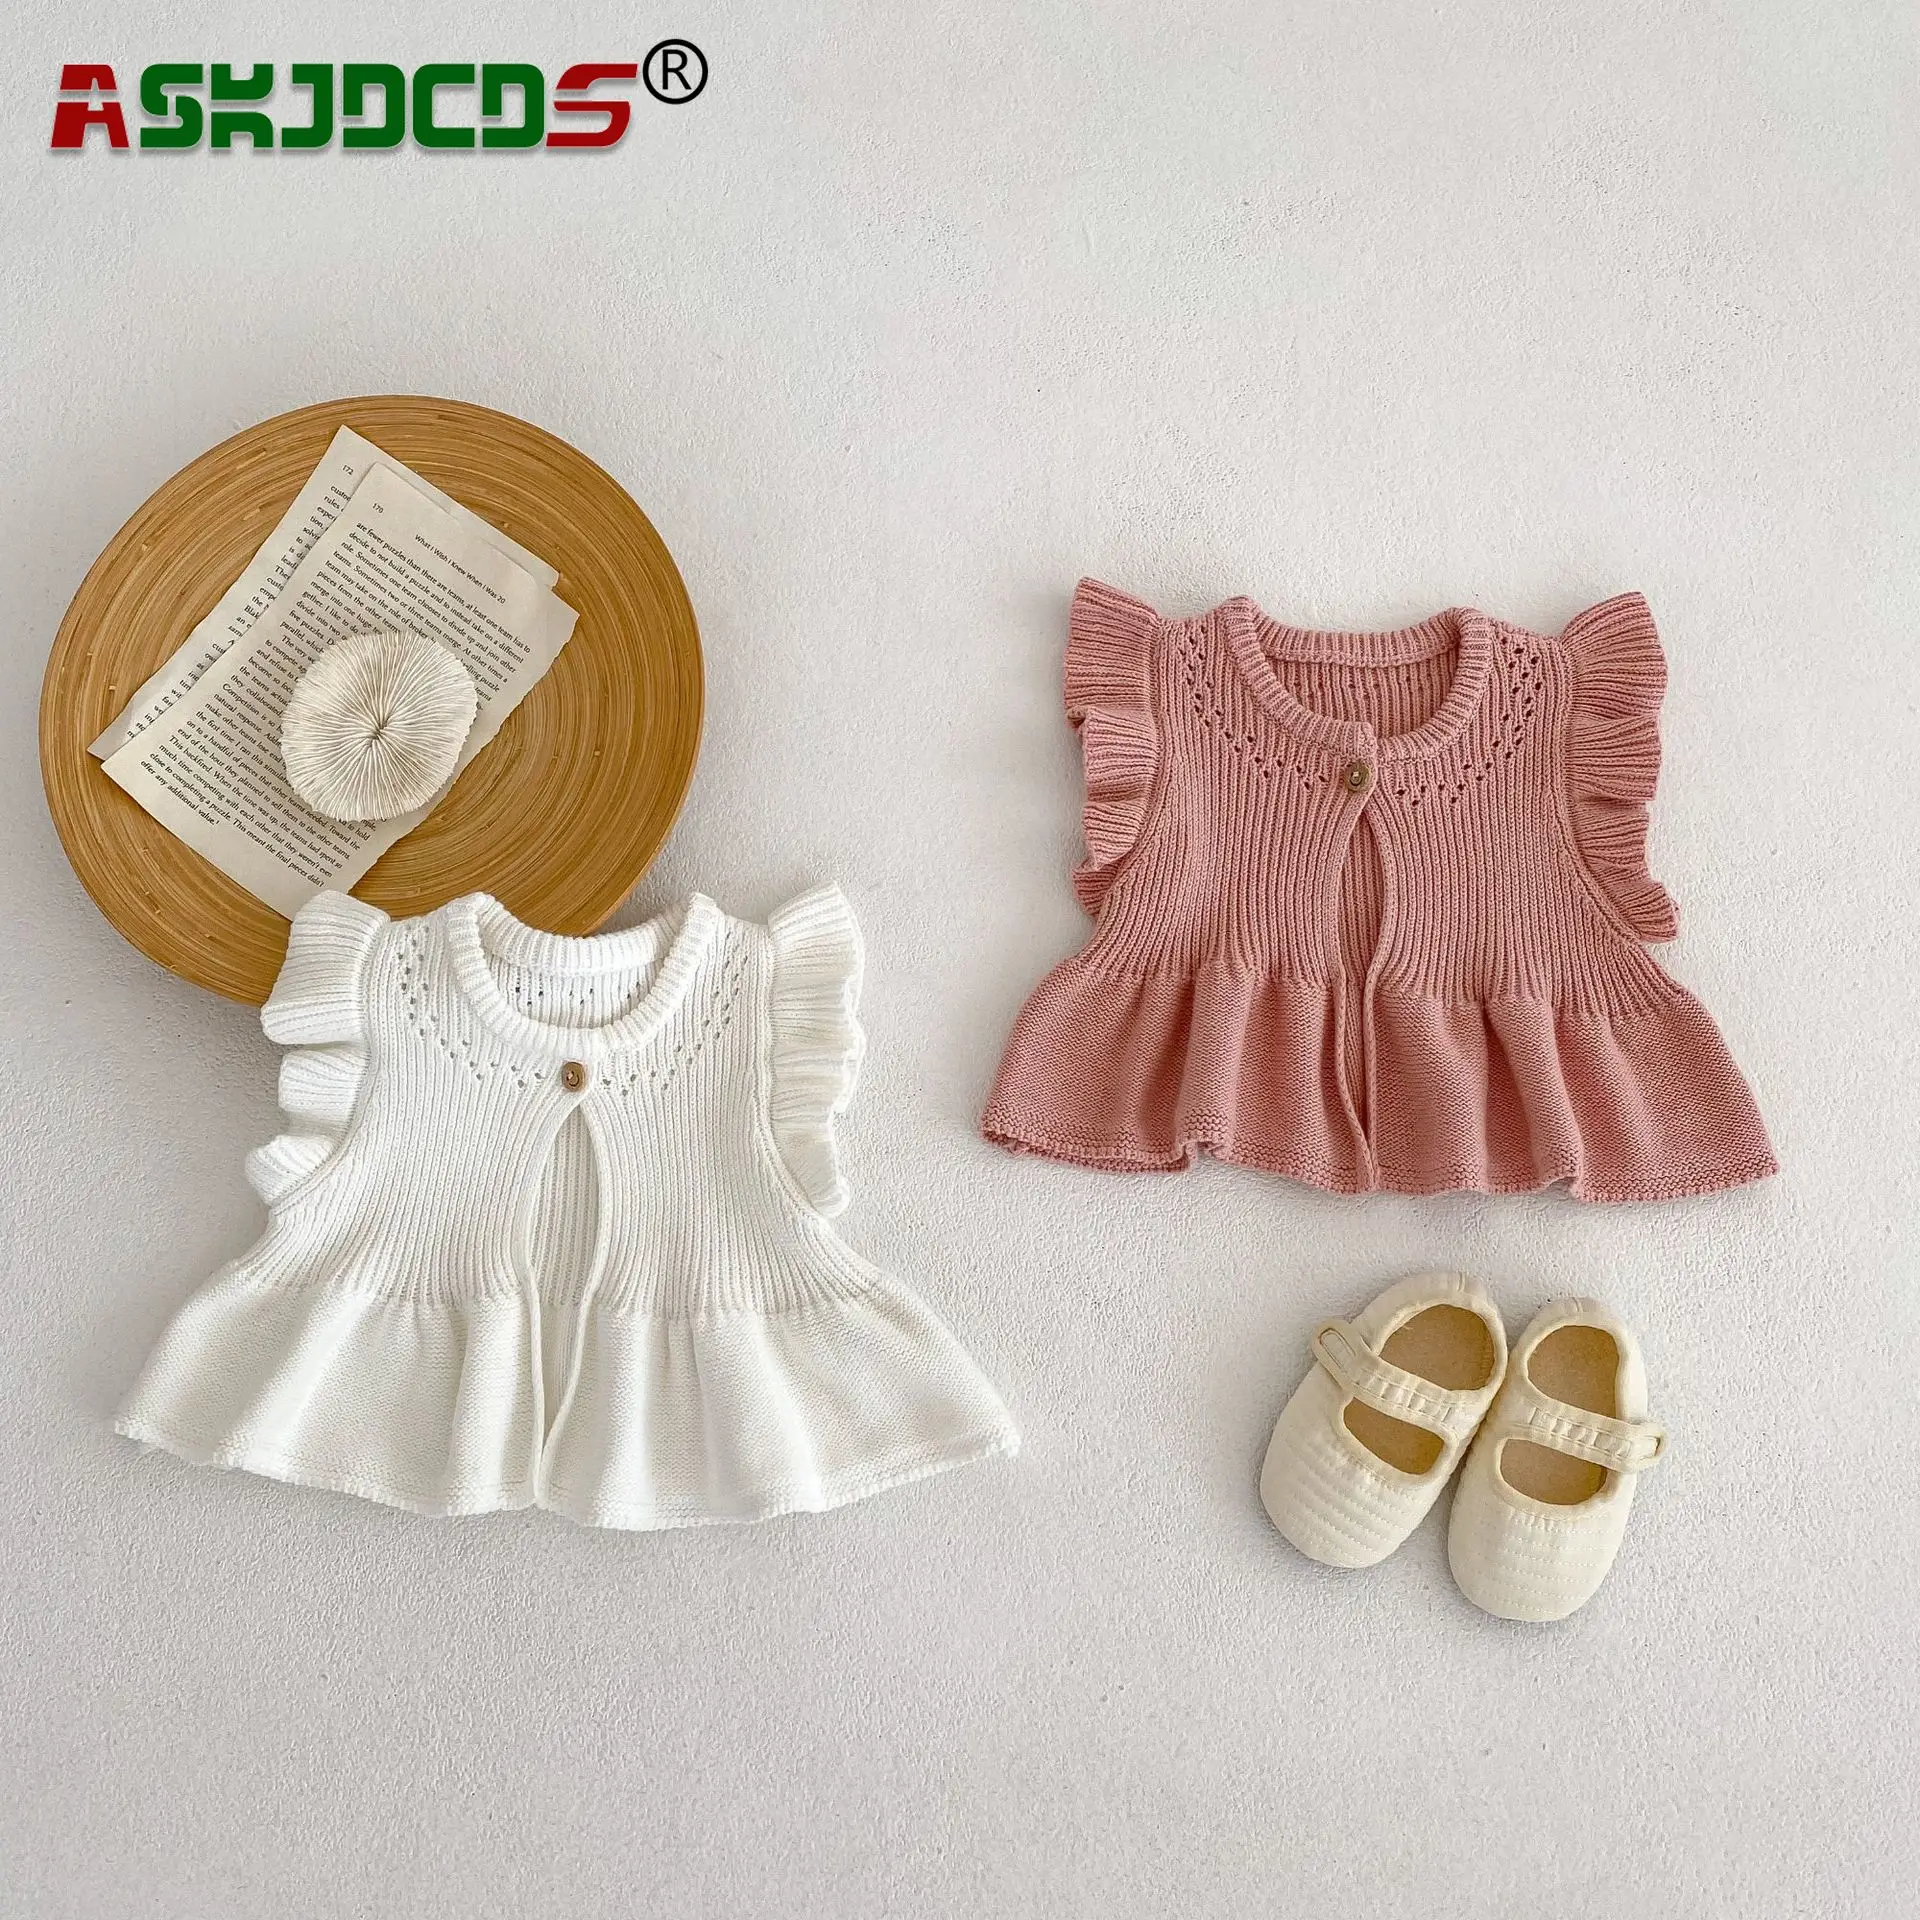 2023 New In Baby Girls Fly Sleeve Knitted Solid Color Outfits Newborn Infant Soft Top Cardigan Kids Hollow Out Vest Sweater 3pcs newborn summer casual outfits baby girls floral fly sleeve round neck bodysuit suspender skirts solid color headband